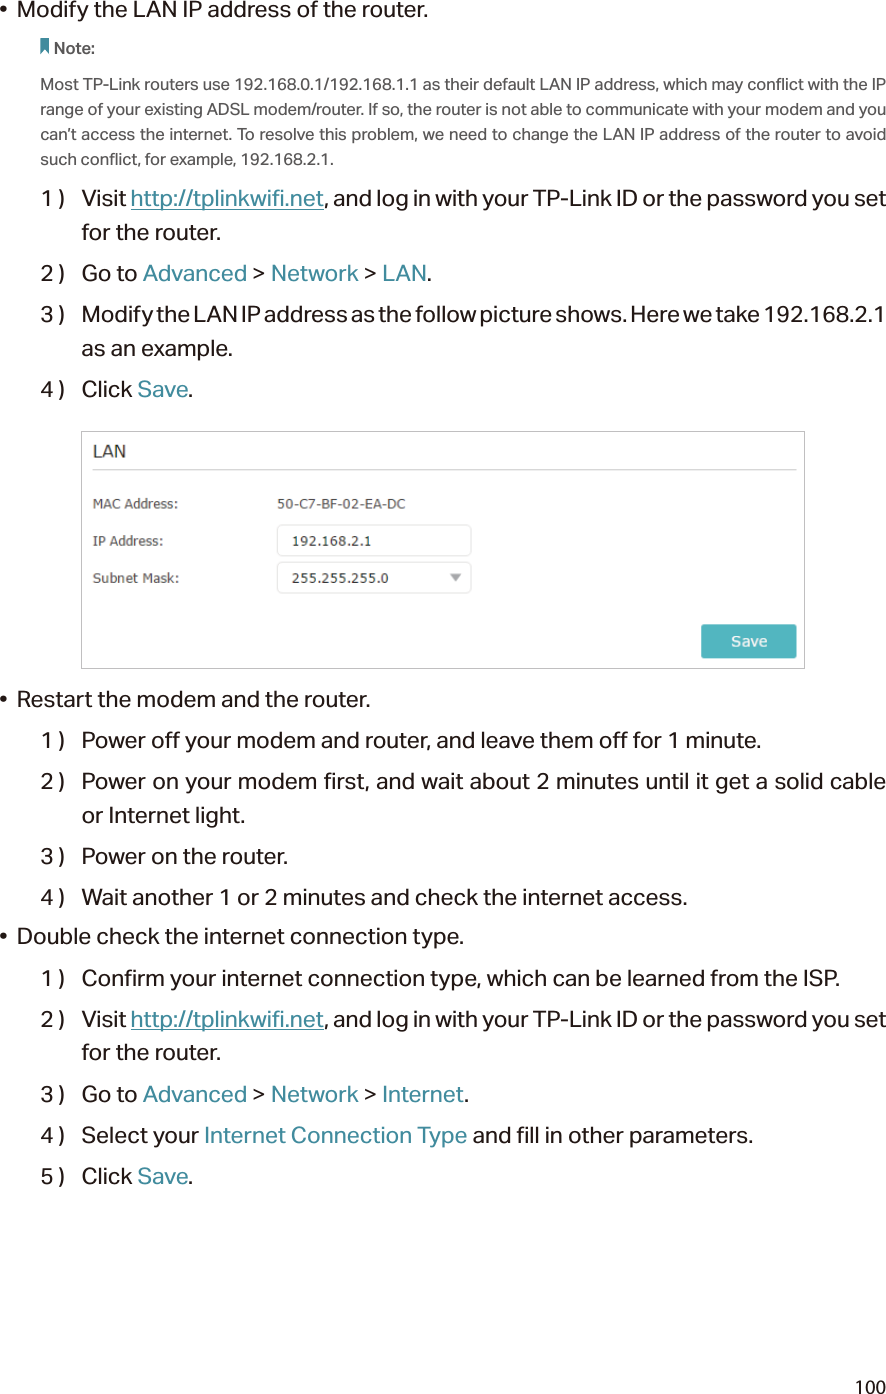 100•  Modify the LAN IP address of the router.Note: Most TP-Link routers use 192.168.0.1/192.168.1.1 as their default LAN IP address, which may conflict with the IP range of your existing ADSL modem/router. If so, the router is not able to communicate with your modem and you can’t access the internet. To resolve this problem, we need to change the LAN IP address of the router to avoid such conflict, for example, 192.168.2.1. 1 )  Visit http://tplinkwifi.net, and log in with your TP-Link ID or the password you set for the router.2 )  Go to Advanced &gt; Network &gt; LAN.3 )  Modify the LAN IP address as the follow picture shows. Here we take 192.168.2.1 as an example.4 )  Click Save.•  Restart the modem and the router.1 )  Power off your modem and router, and leave them off for 1 minute.2 )  Power on your modem first, and wait about 2 minutes until it get a solid cable or Internet light.3 )  Power on the router.4 )  Wait another 1 or 2 minutes and check the internet access.•  Double check the internet connection type.1 )  Confirm your internet connection type, which can be learned from the ISP.2 )  Visit http://tplinkwifi.net, and log in with your TP-Link ID or the password you set for the router.3 )  Go to Advanced &gt; Network &gt; Internet.4 )  Select your Internet Connection Type and fill in other parameters.5 )  Click Save.